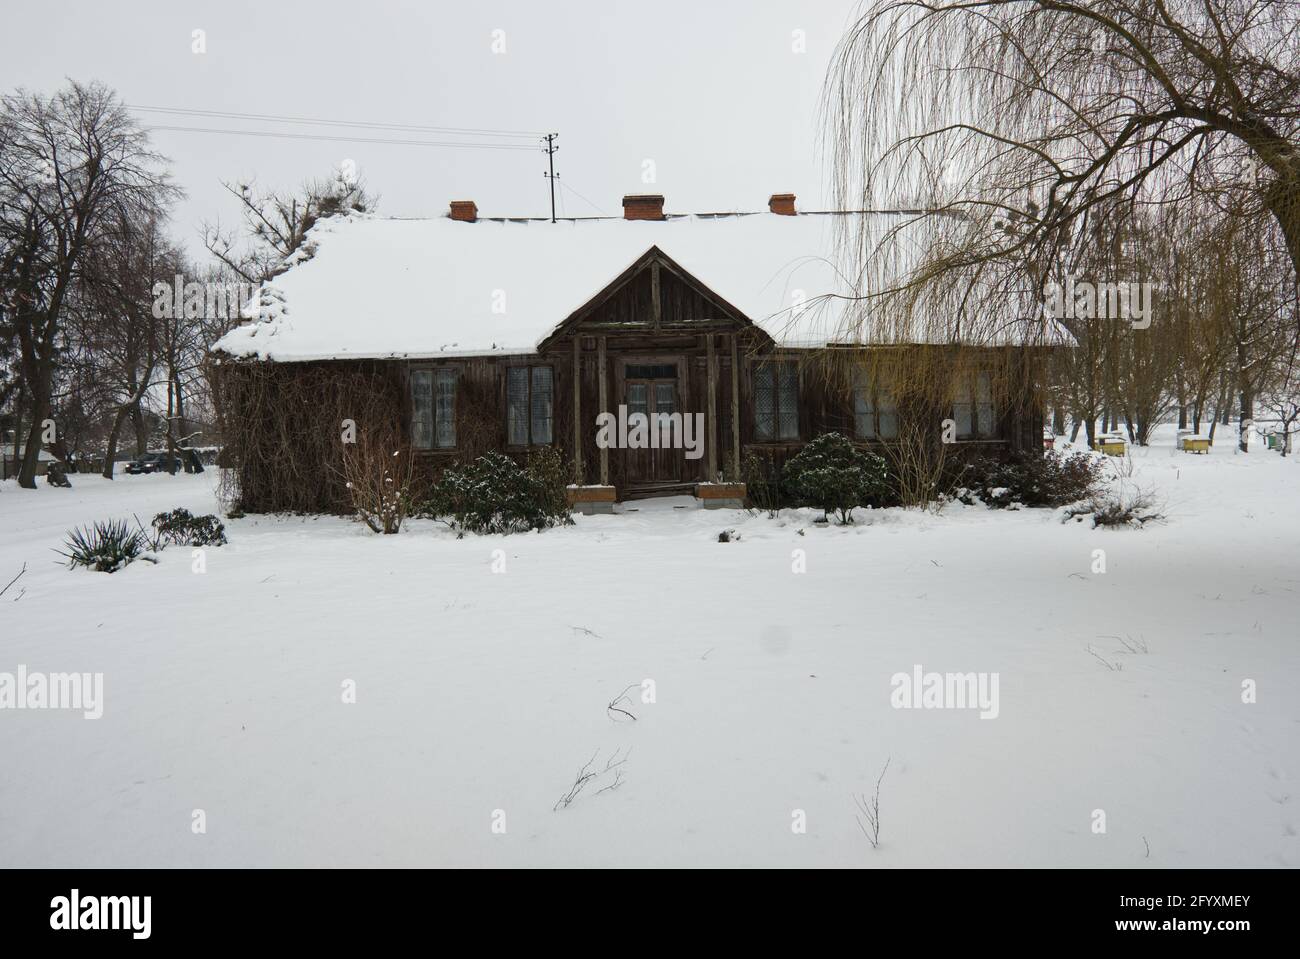 DRATOW, POLAND 01/29/21 Old wooden building of a rectory covered in snow in winter Stock Photo